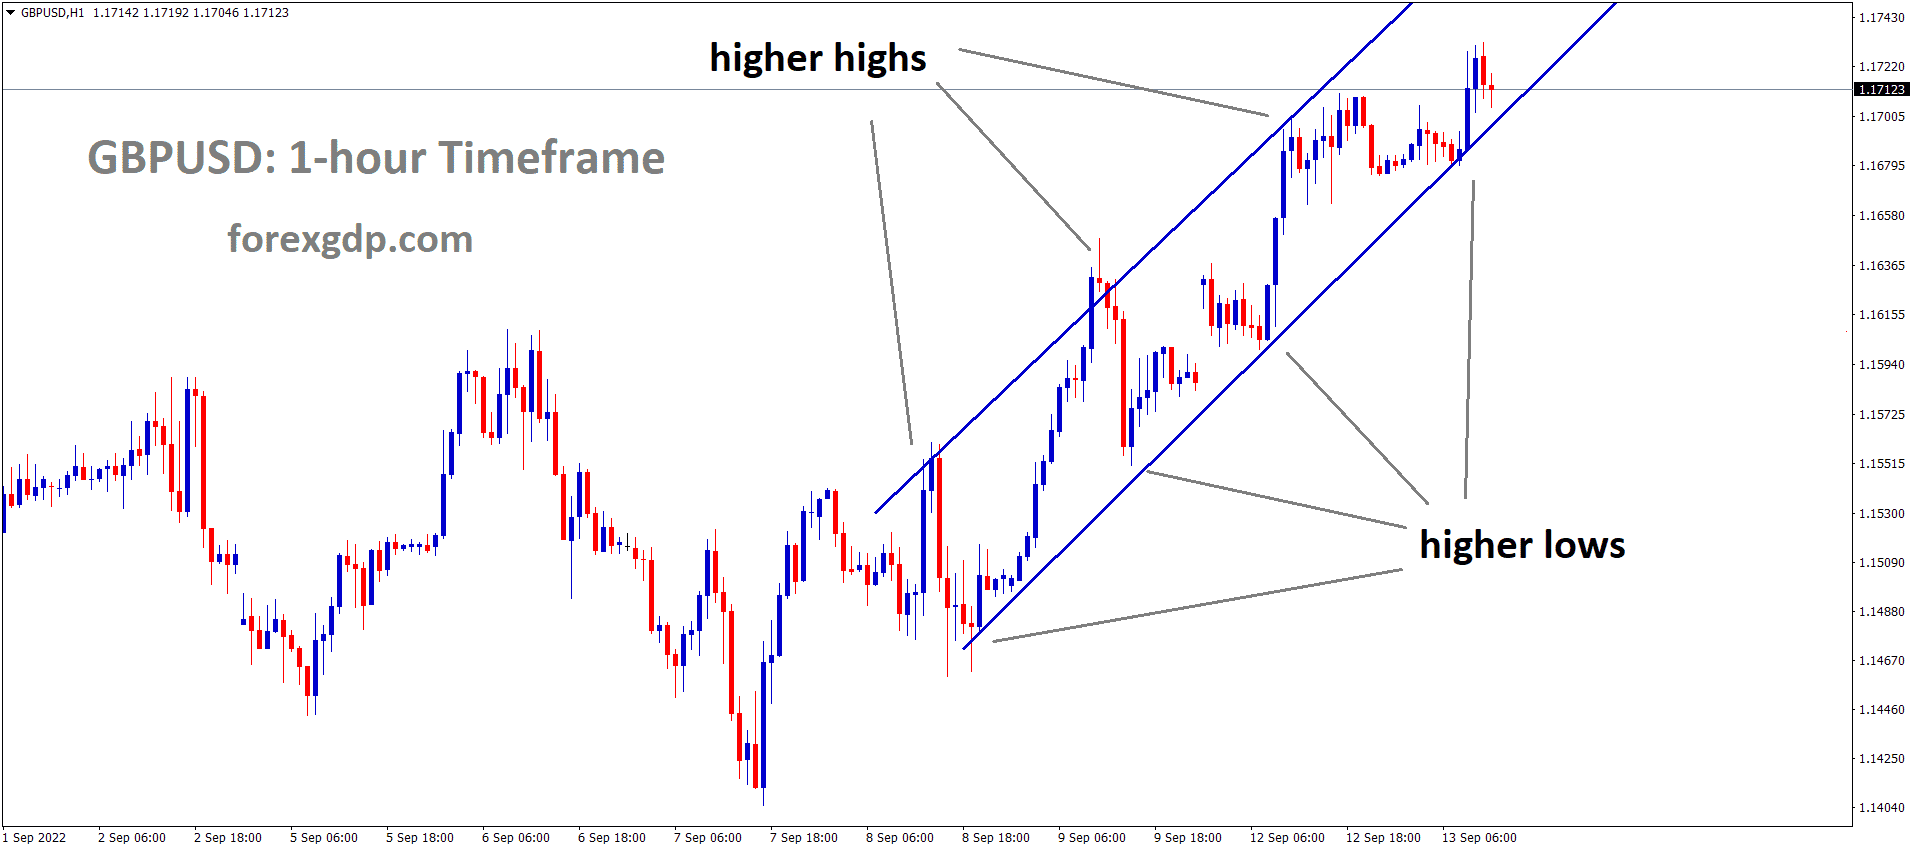 GBPUSD is moving in an ascending channel and the market has rebounded from the higher low area of the channel